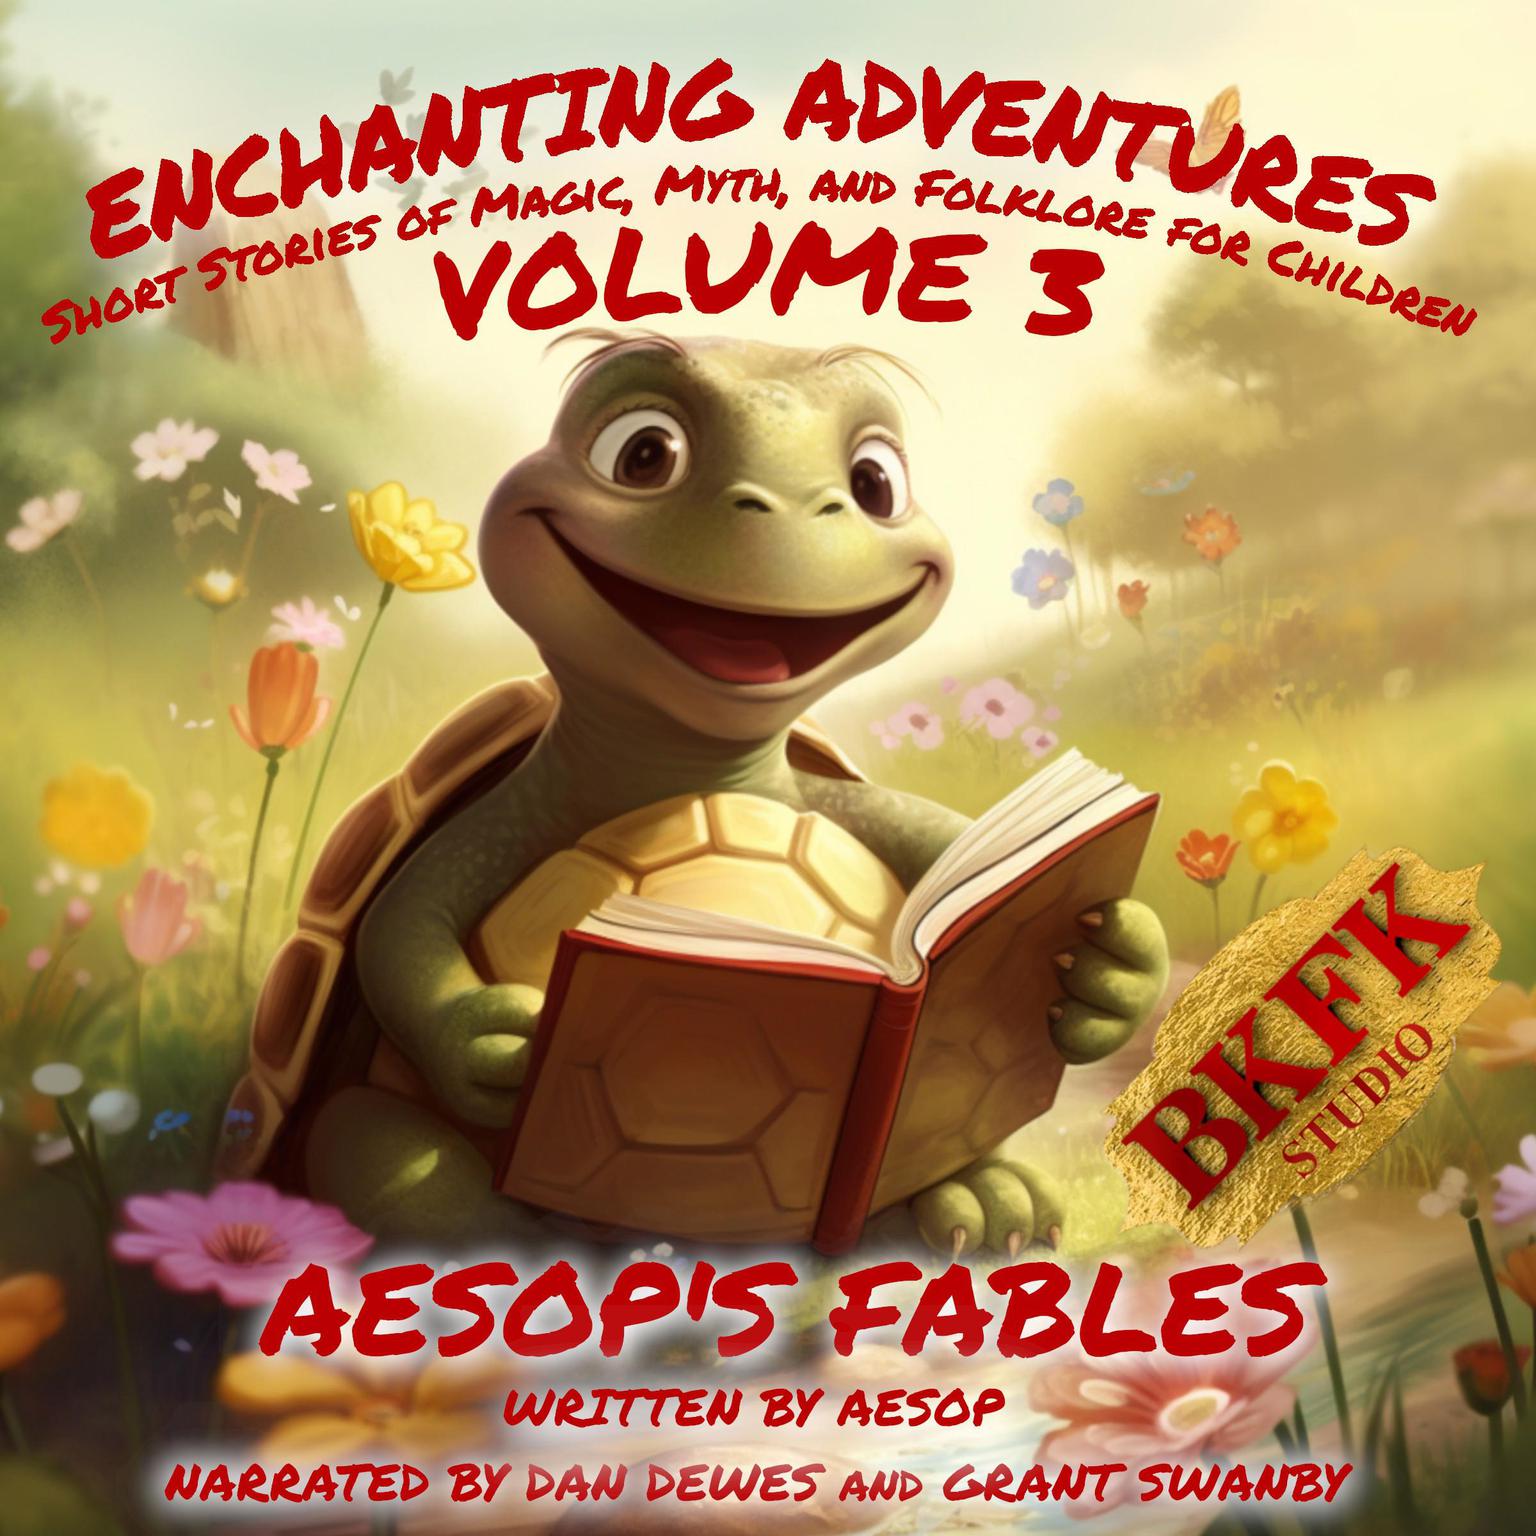 Enchanting Adventures: Short Stories of Magic, Myth, and Folklore for Children - Volume 3: Aesops Fables Audiobook, by Aesop